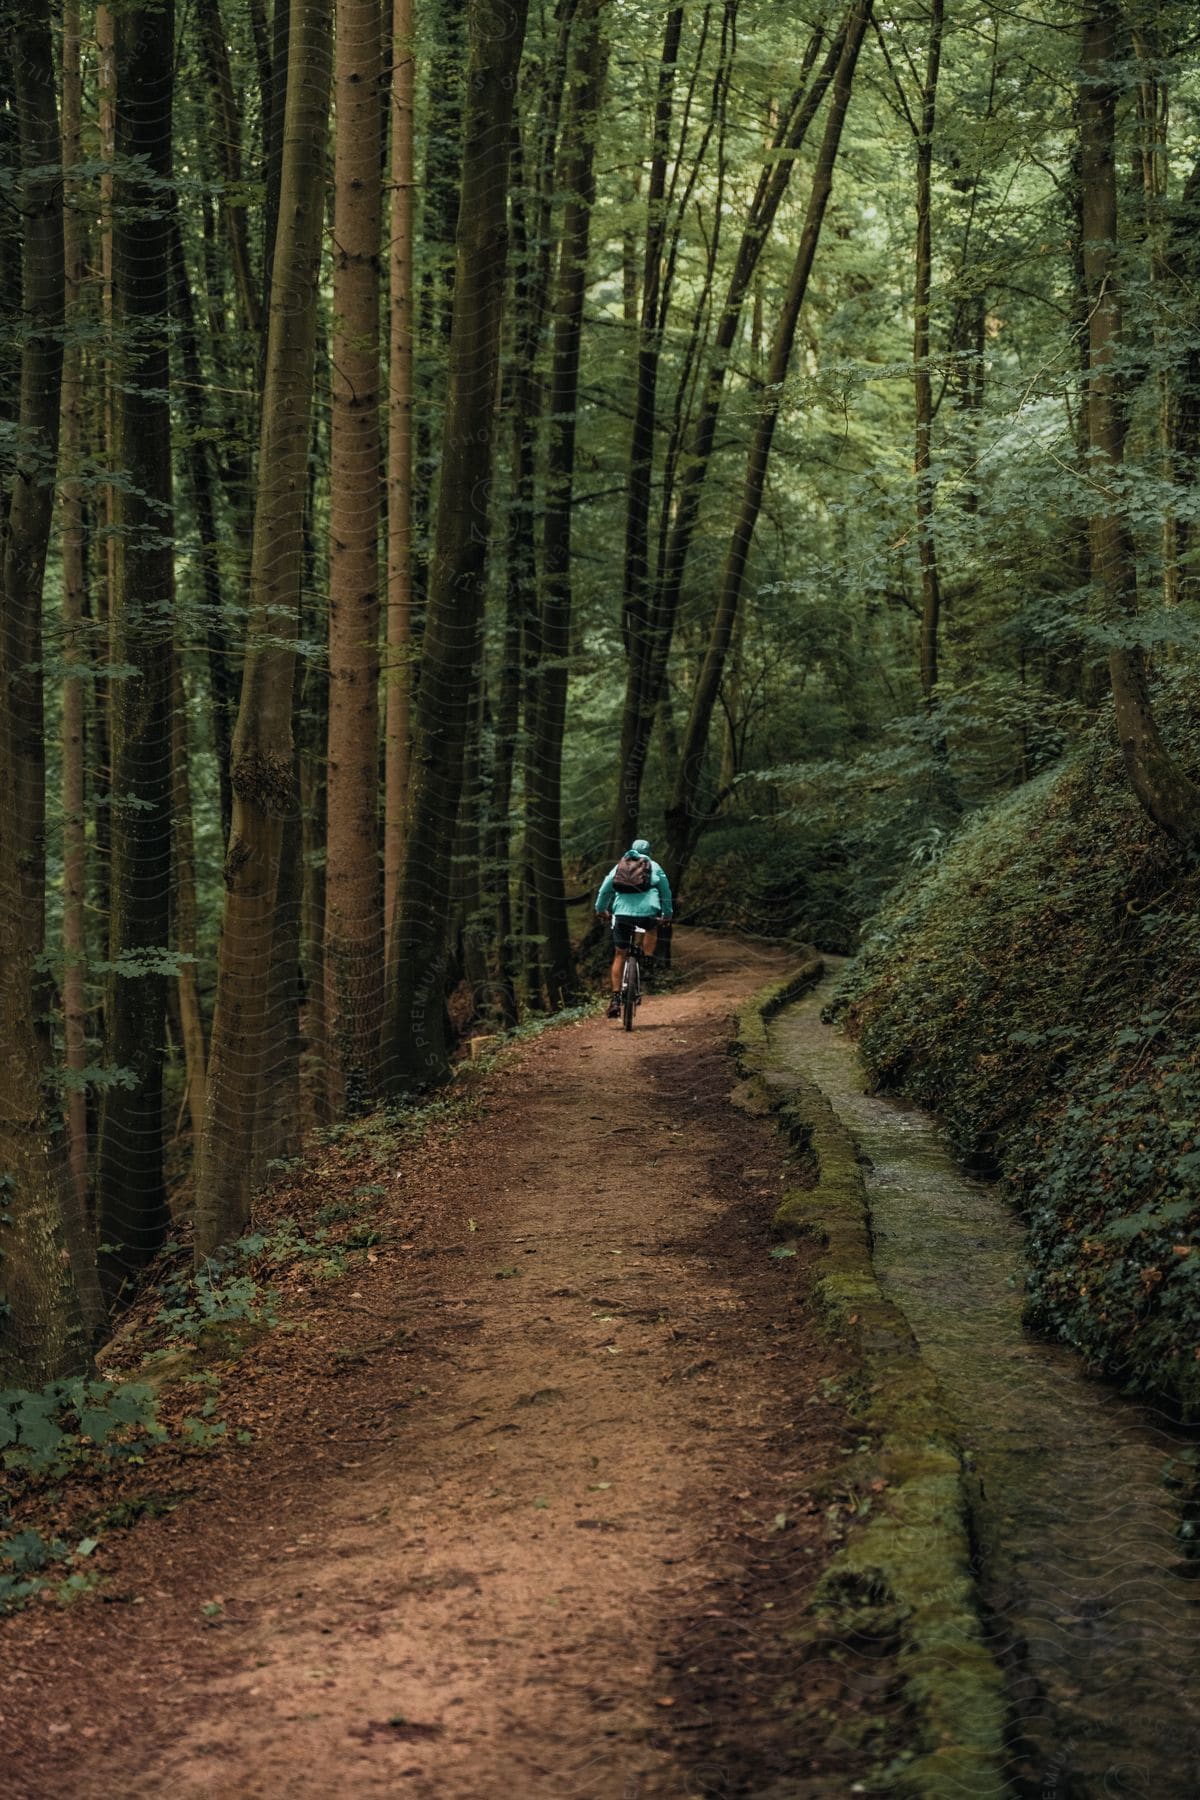 Cyclist is riding a bicycle on a trail through a forested mountain